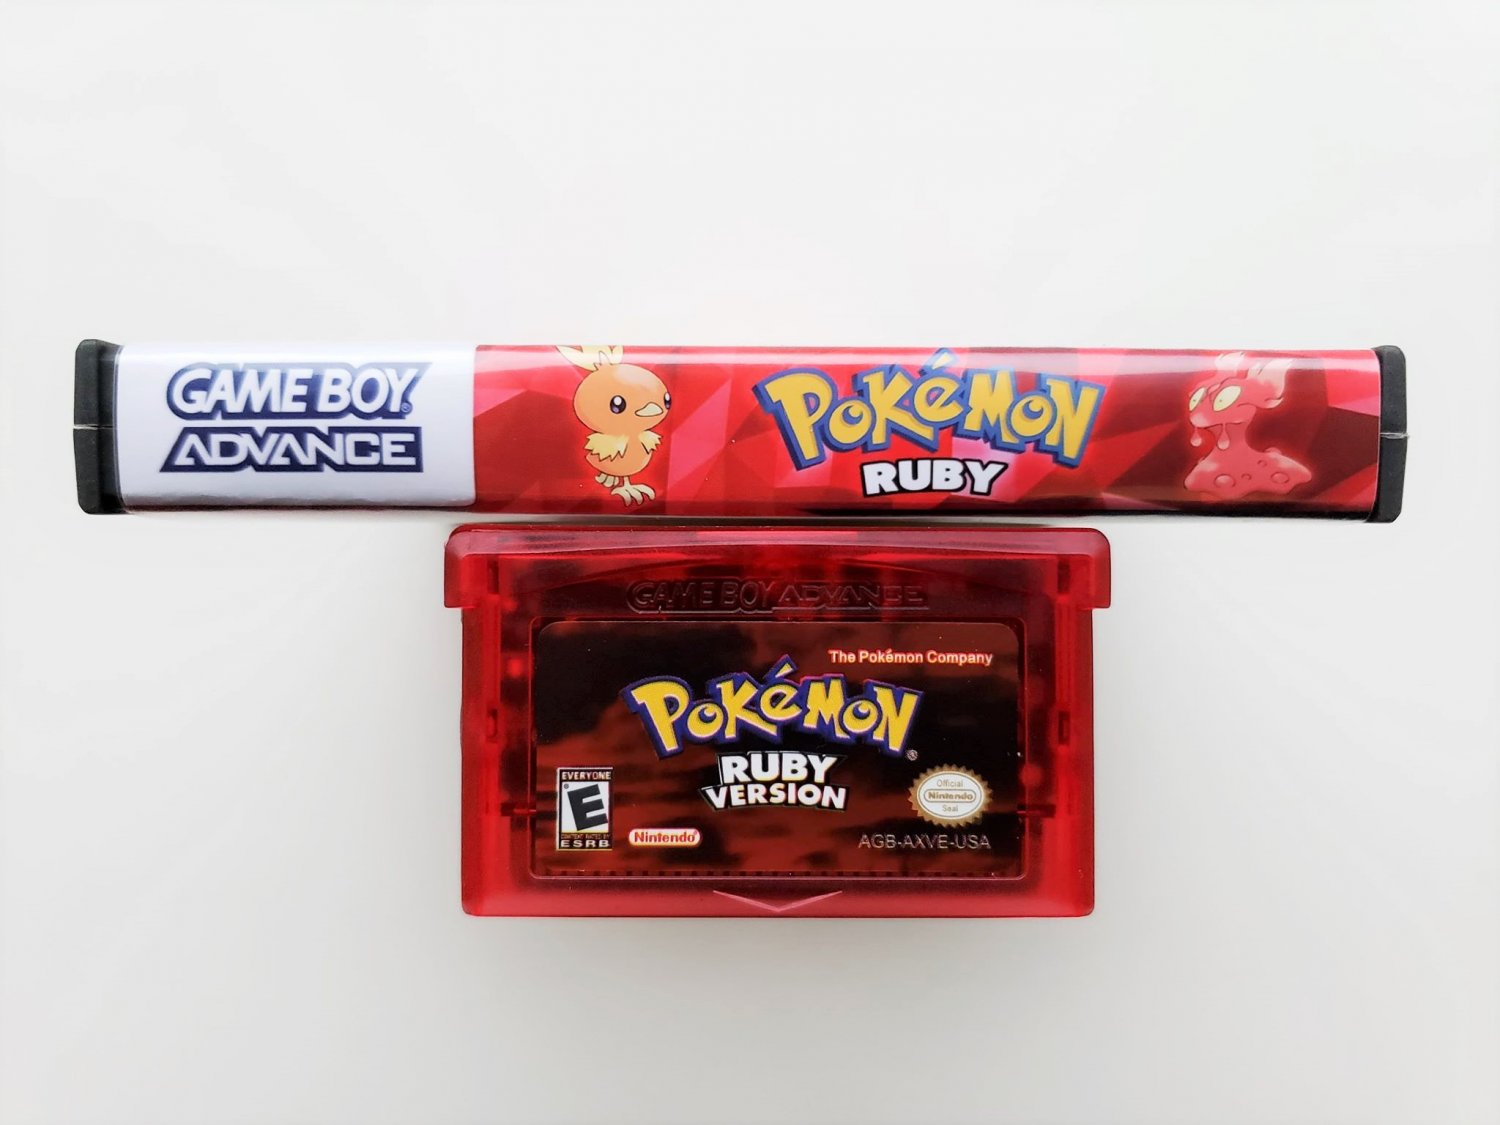 pokemon redfire work with the gamecube gba player